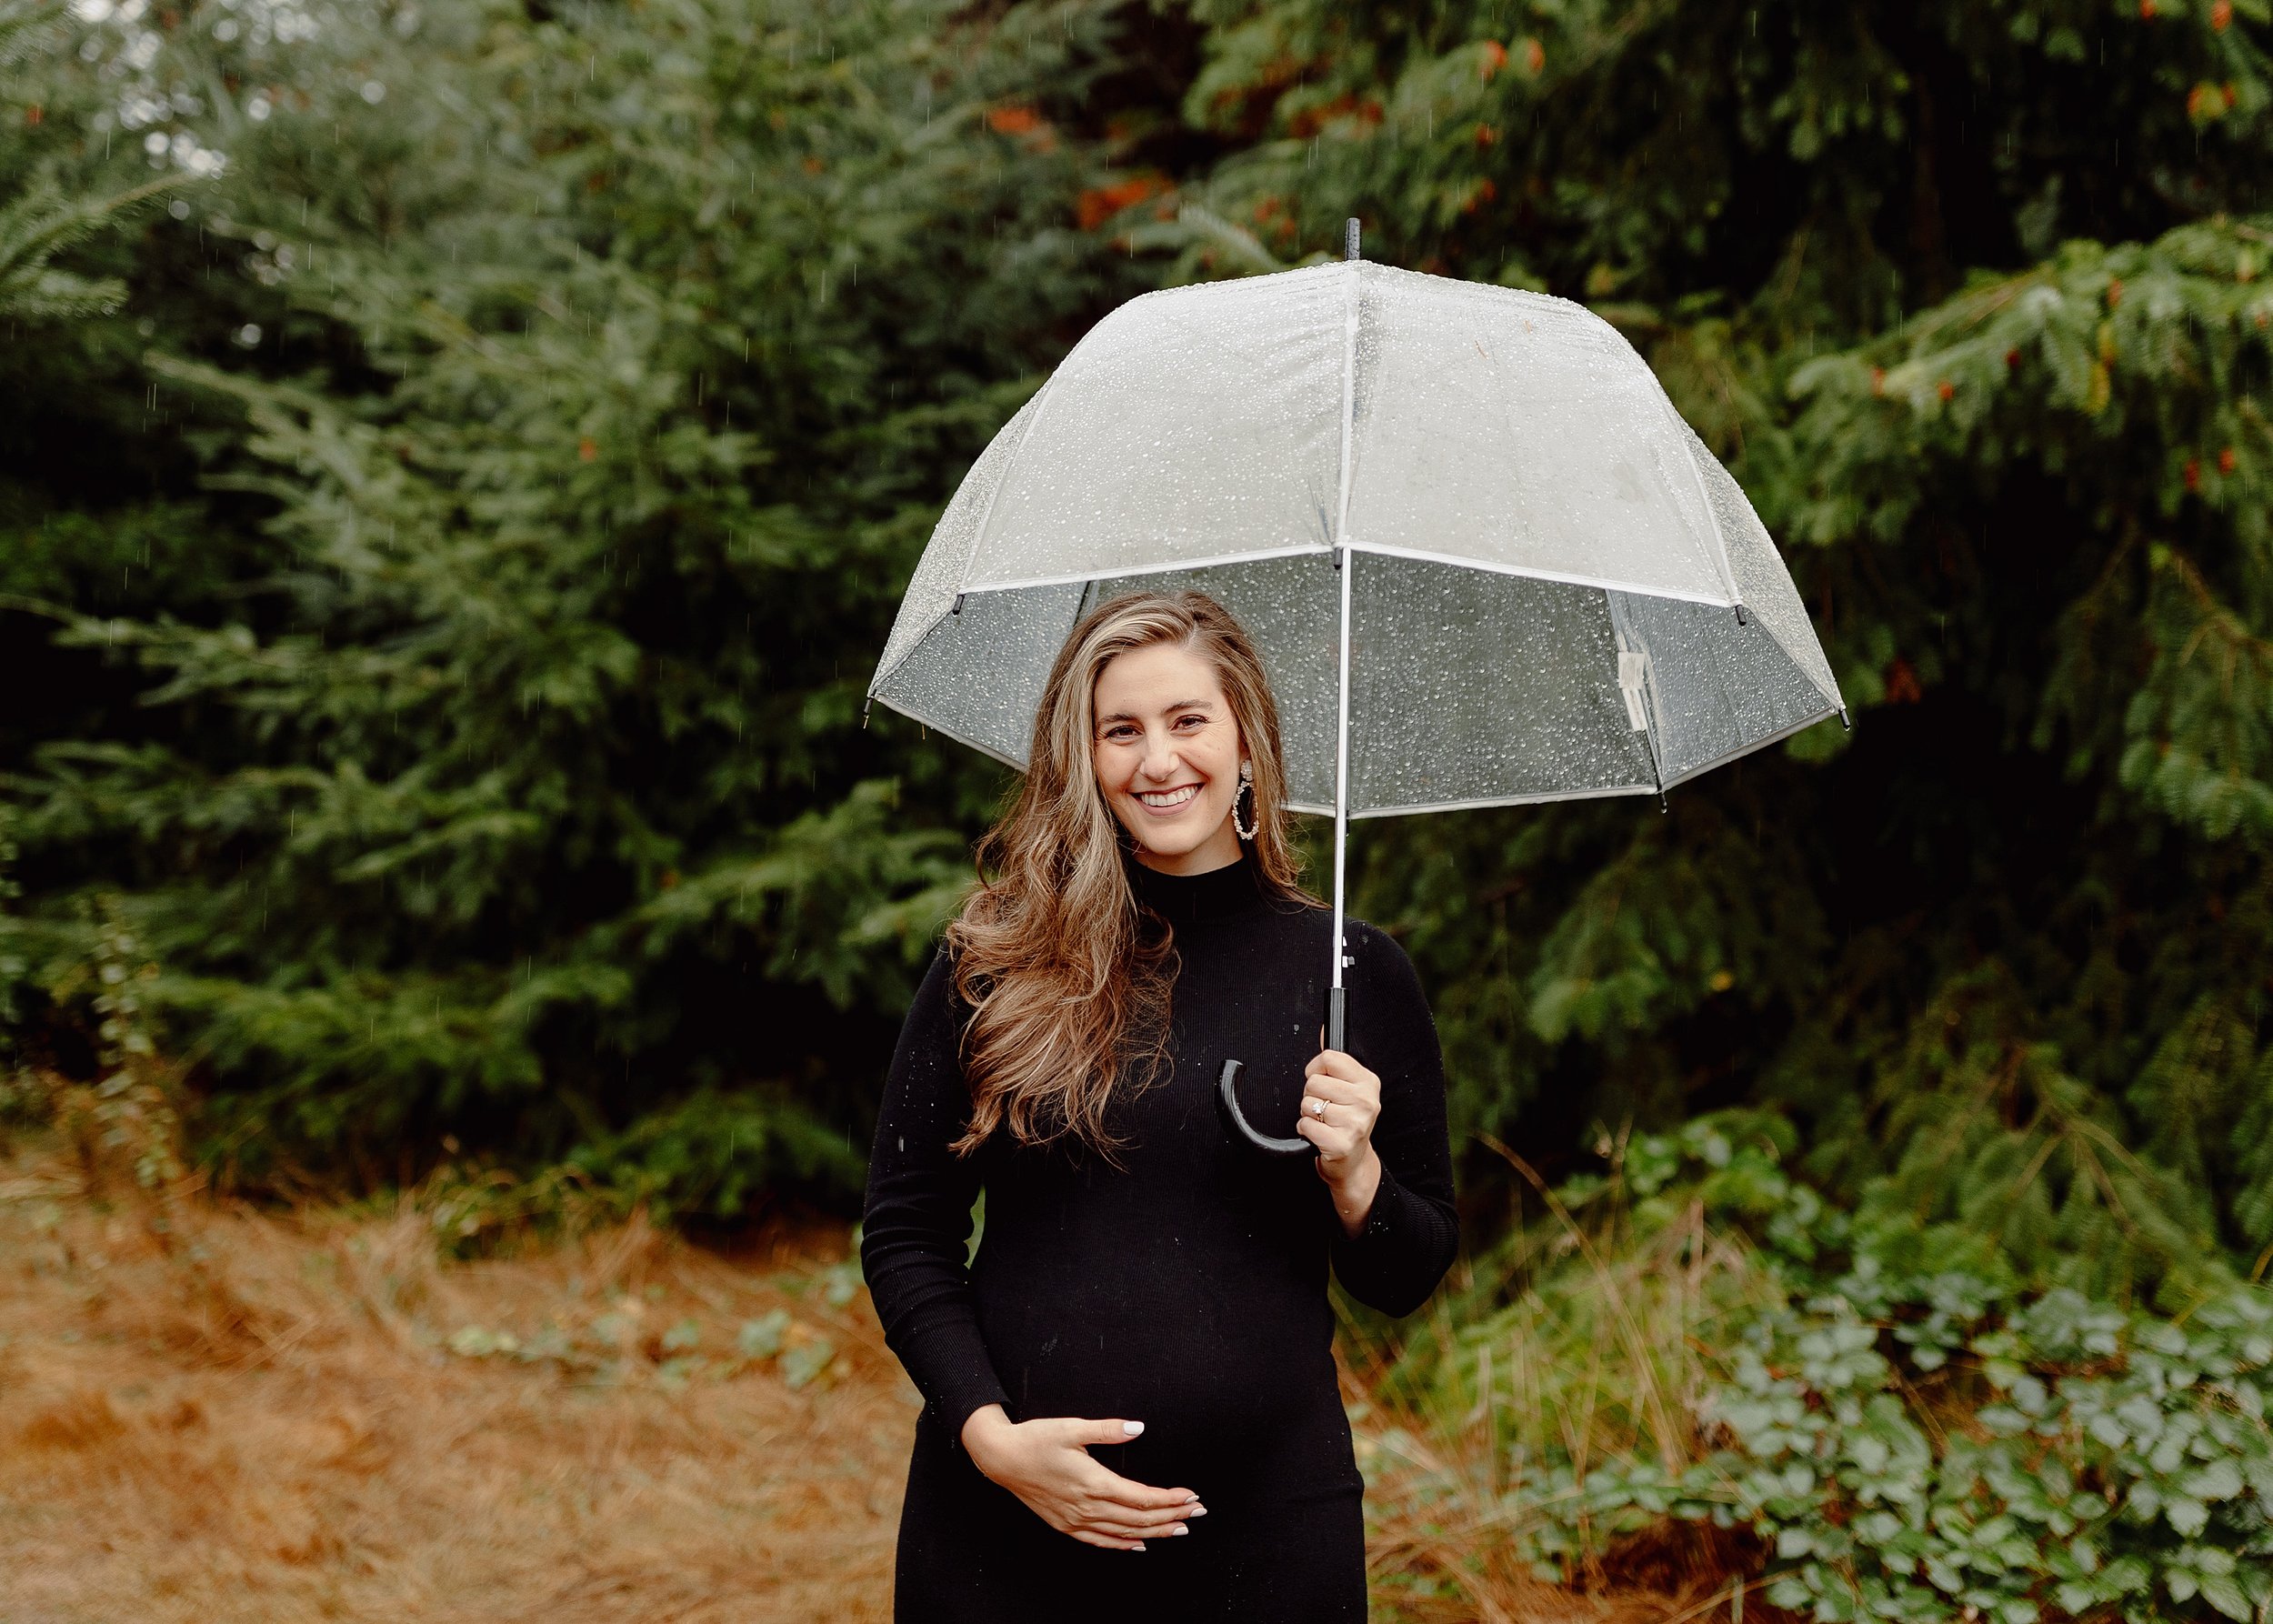 seattle_dog_puppy_maternity_session_newborn_photography_baby_home_lifestyle_fresh_48_session_pnw_0094.jpg